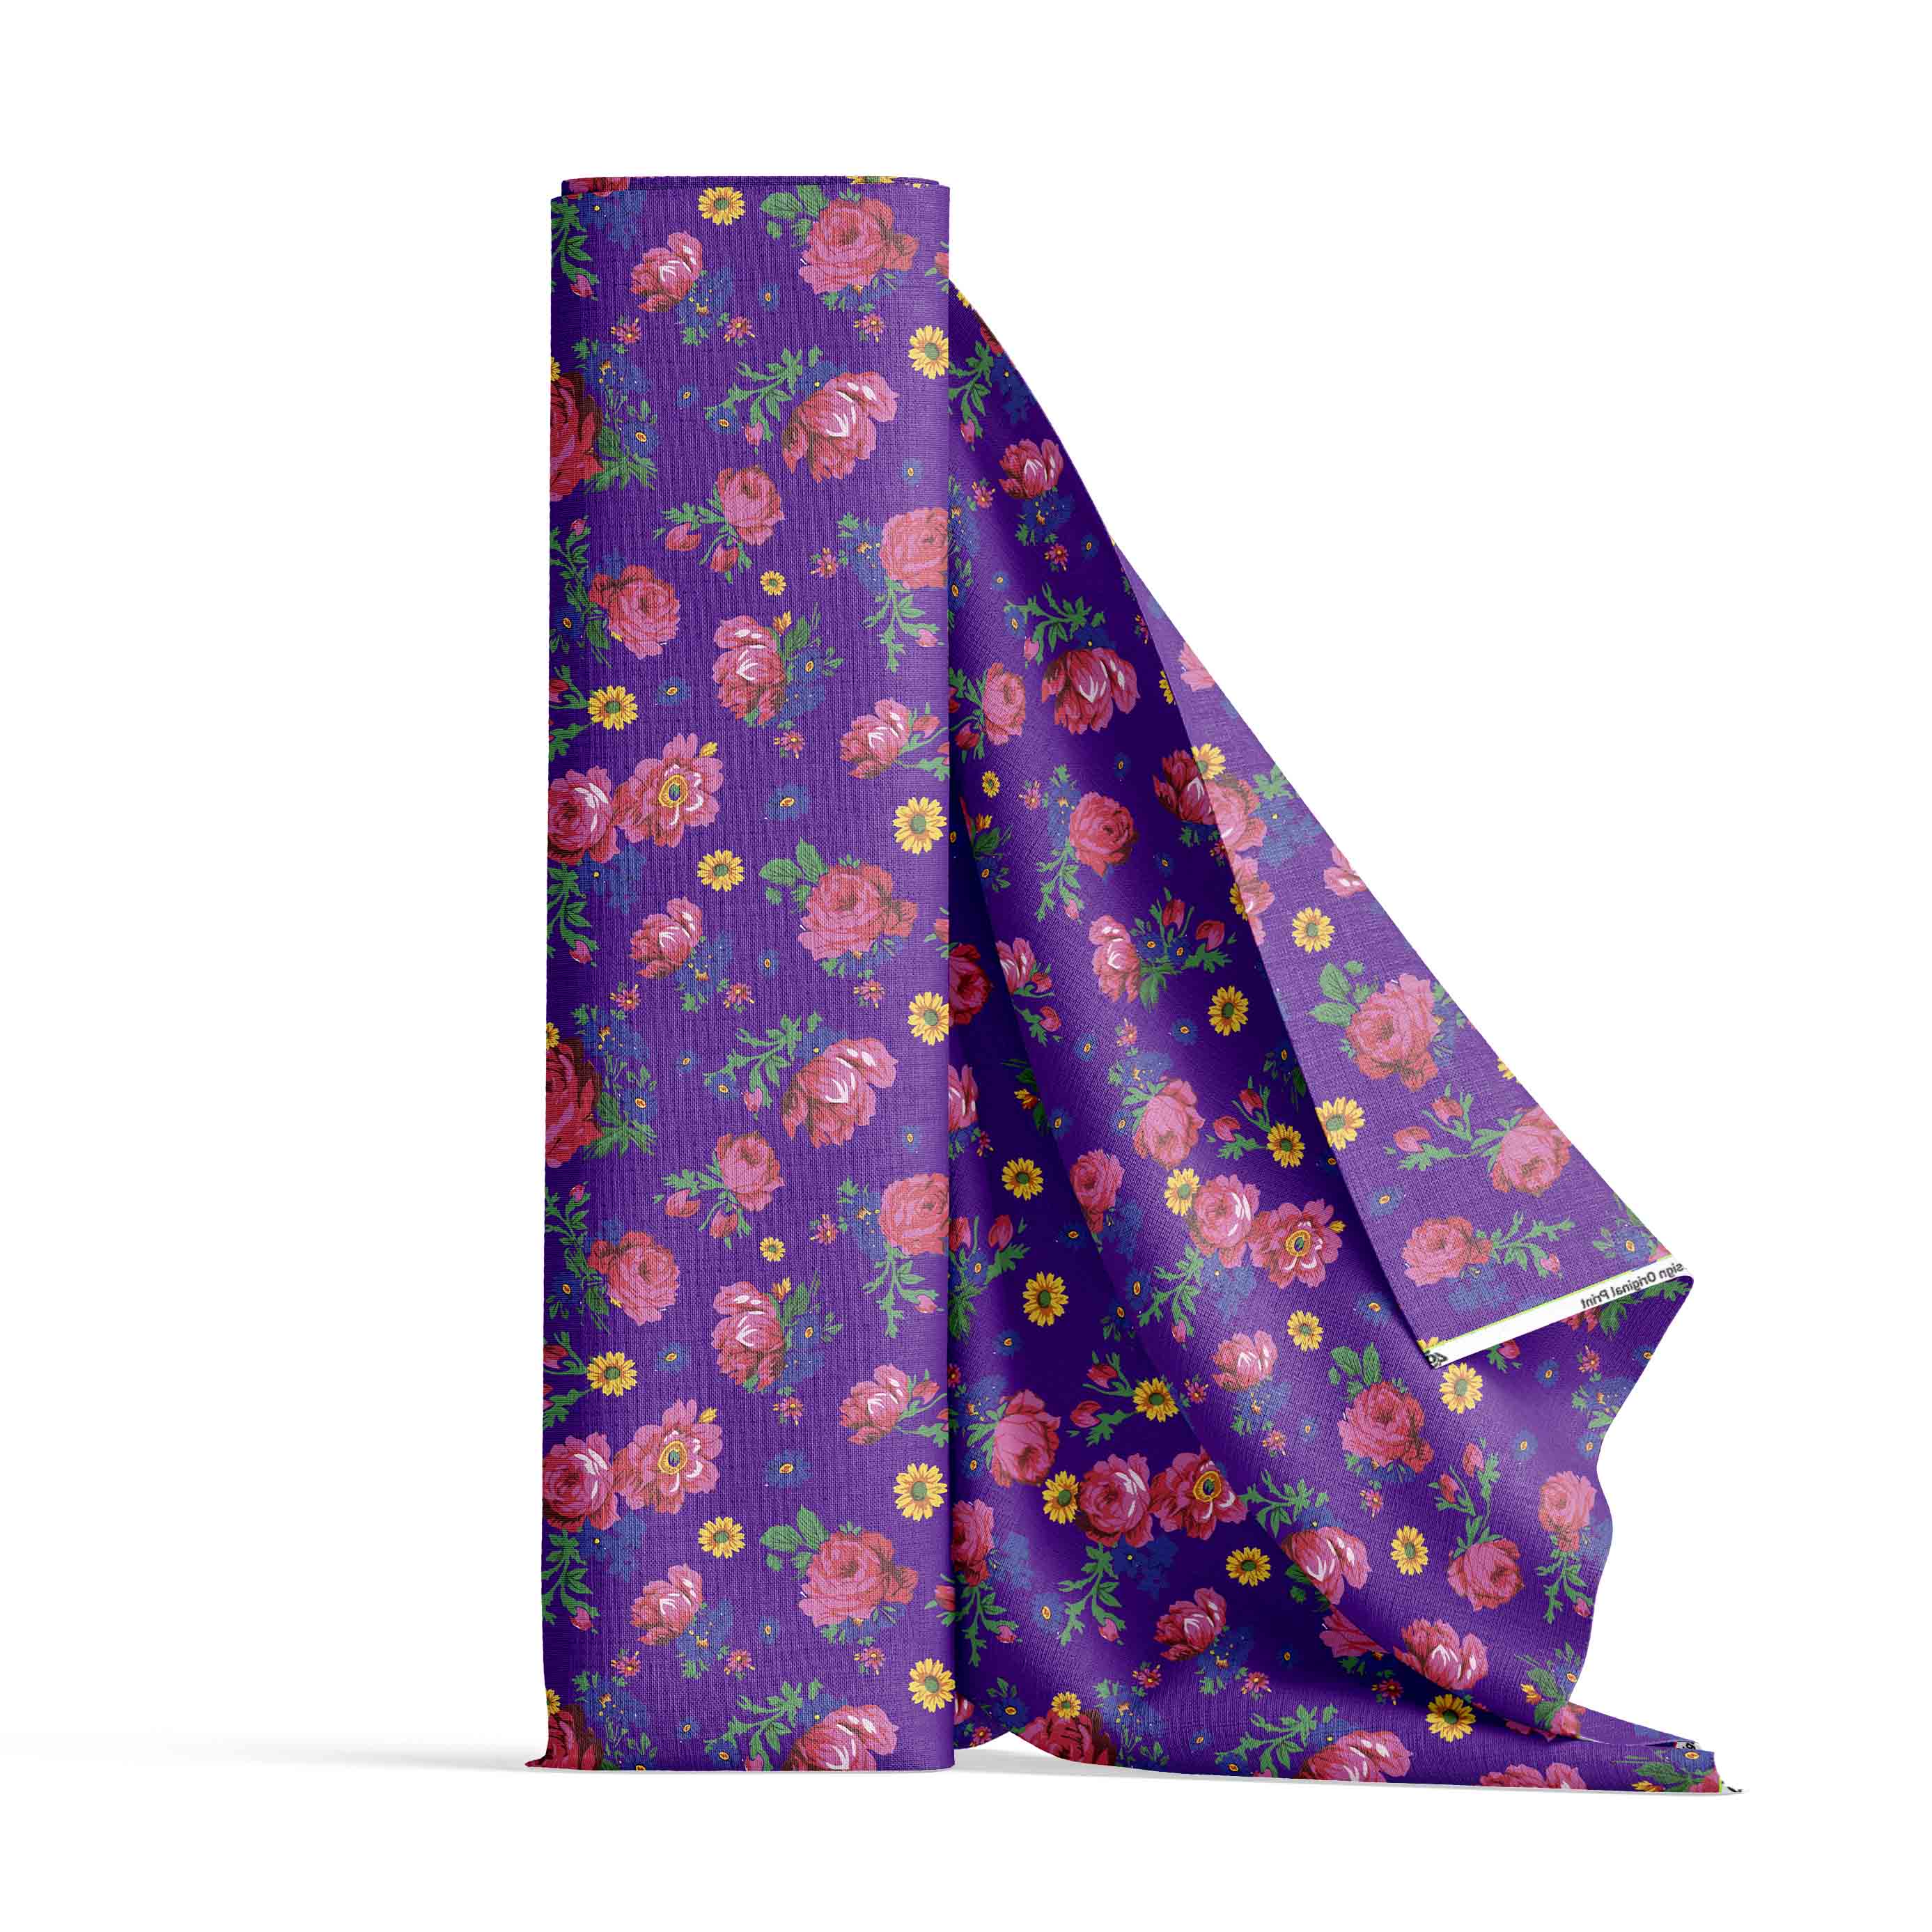 Kokum Ceremony Lavender Cotton Fabric by the Yard